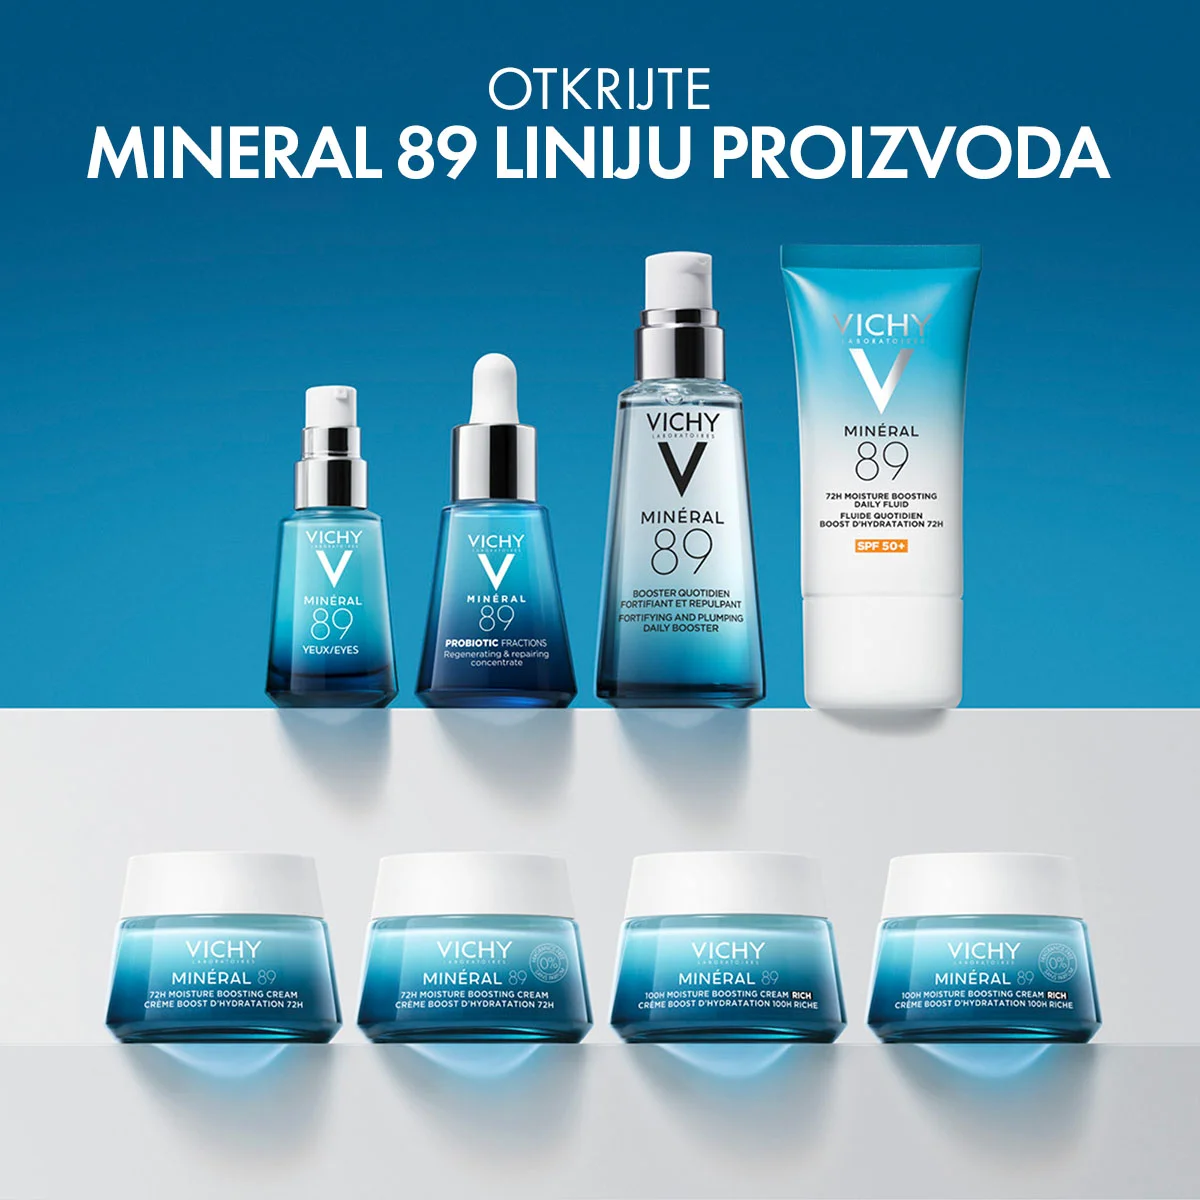 Vichy MINERAL 89 Protocol for intensive hydration and stronger skin for all skin types (9)